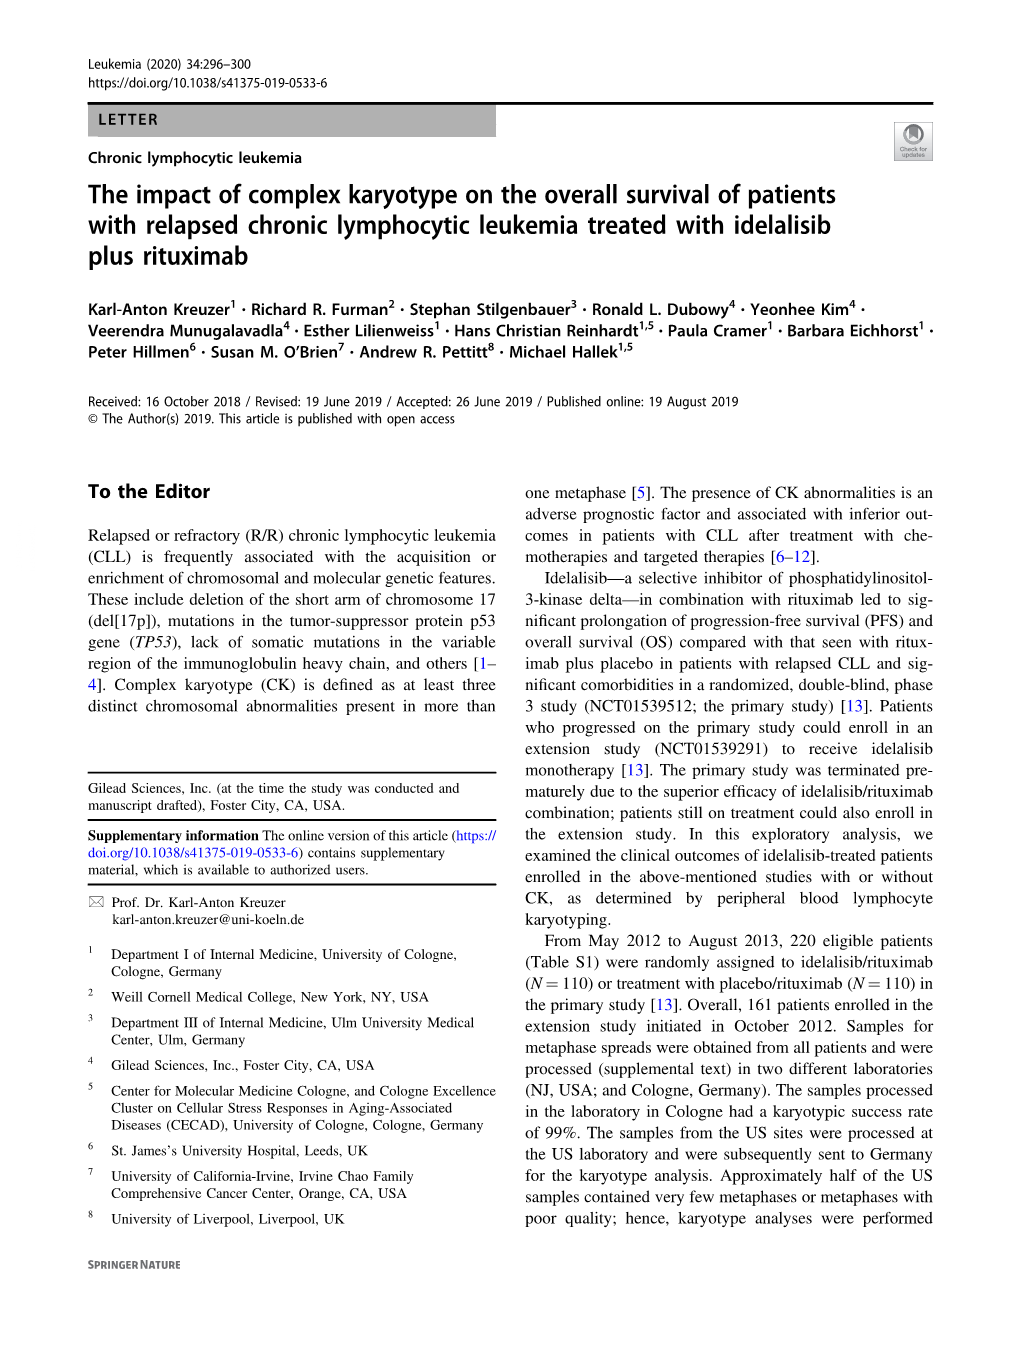 The Impact of Complex Karyotype on the Overall Survival of Patients with Relapsed Chronic Lymphocytic Leukemia Treated with Idelalisib Plus Rituximab